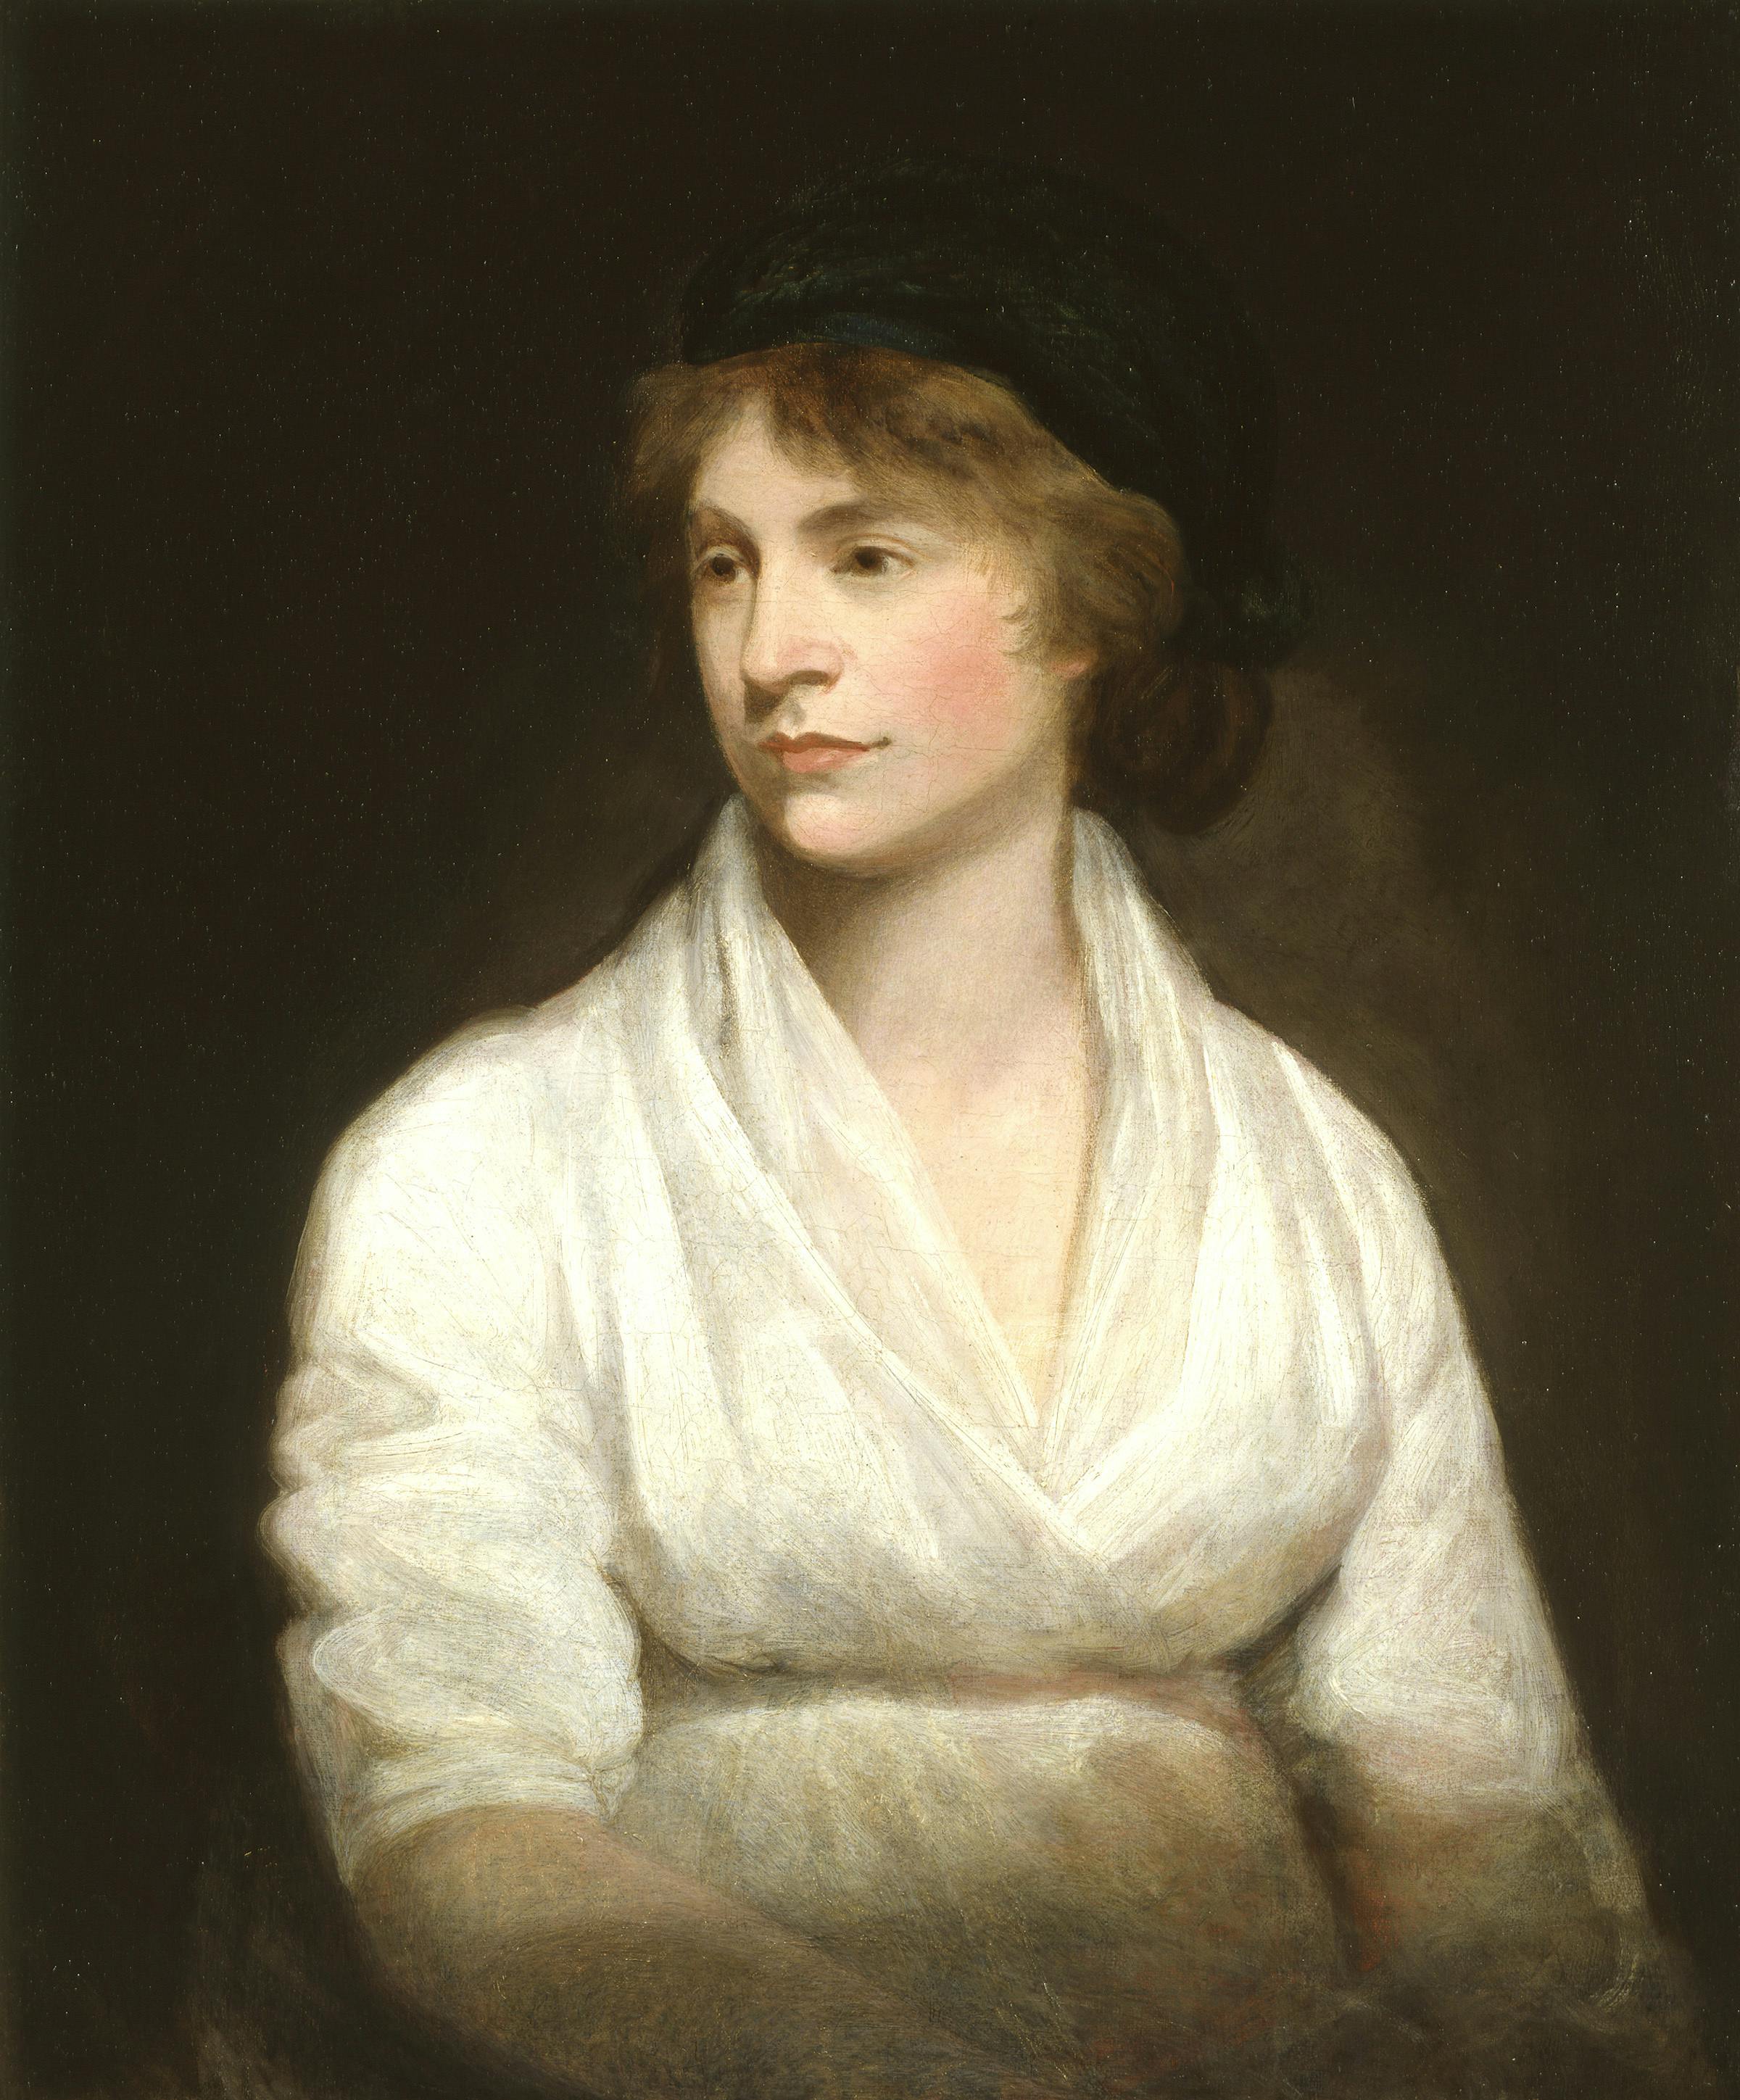 Painting of Mary Wollstonecraft by John Opie